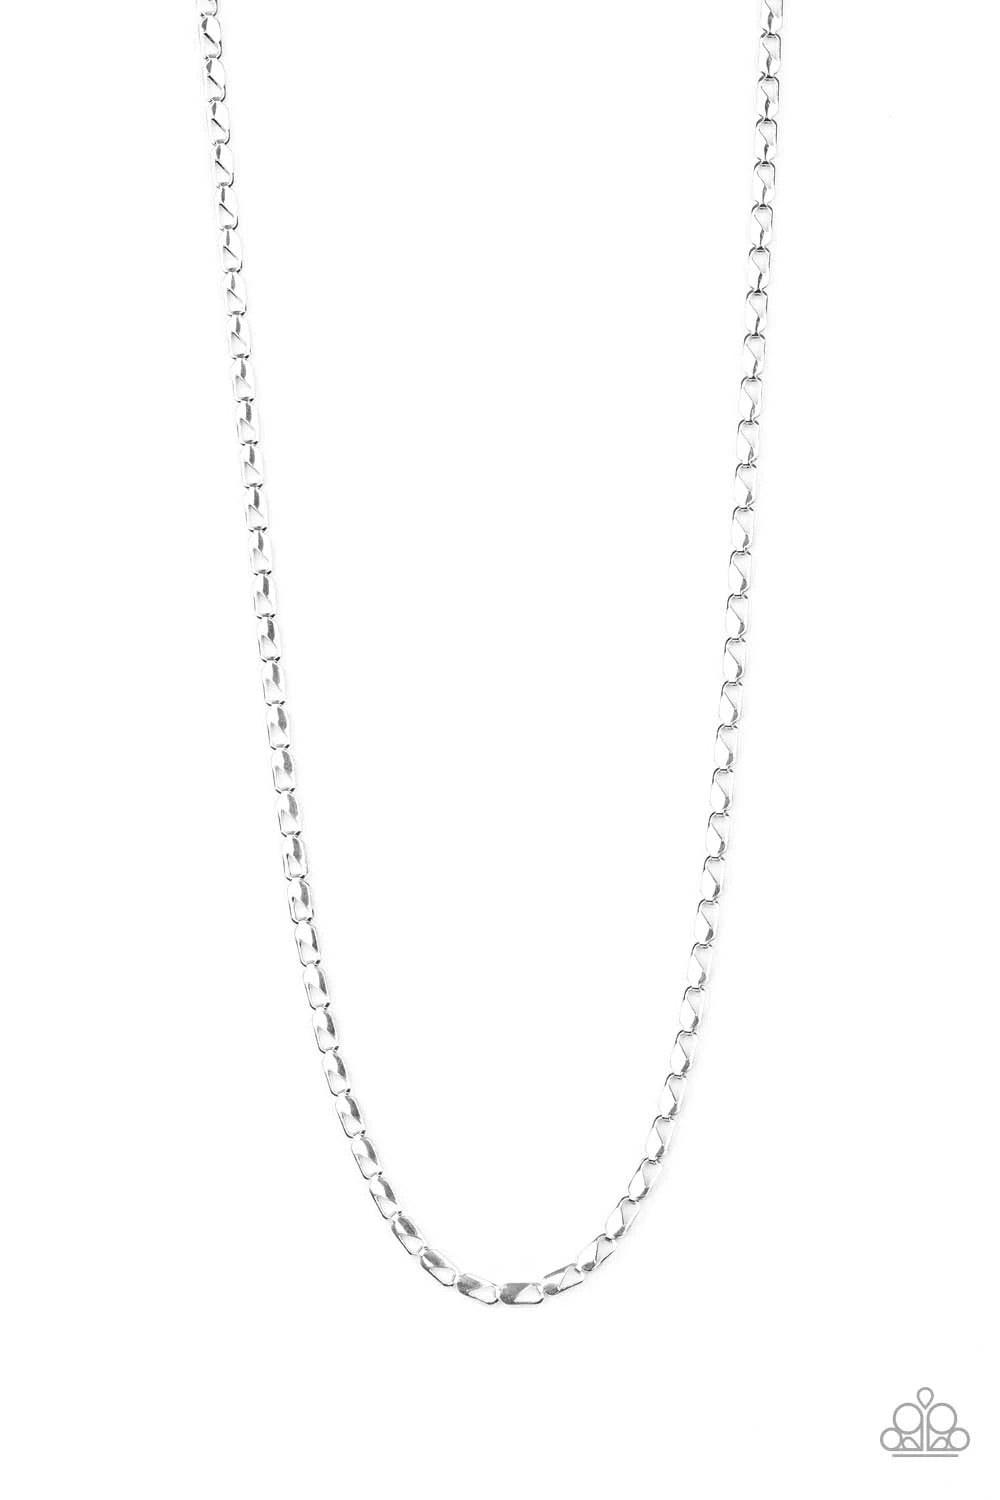 Paparazzi Accessories Free Agency - Silver Featuring clasp-like links, an ornate silver chain drapes across the chest for a causal look. Features an adjustable clasp closure. Sold as one individual necklace. Jewelry